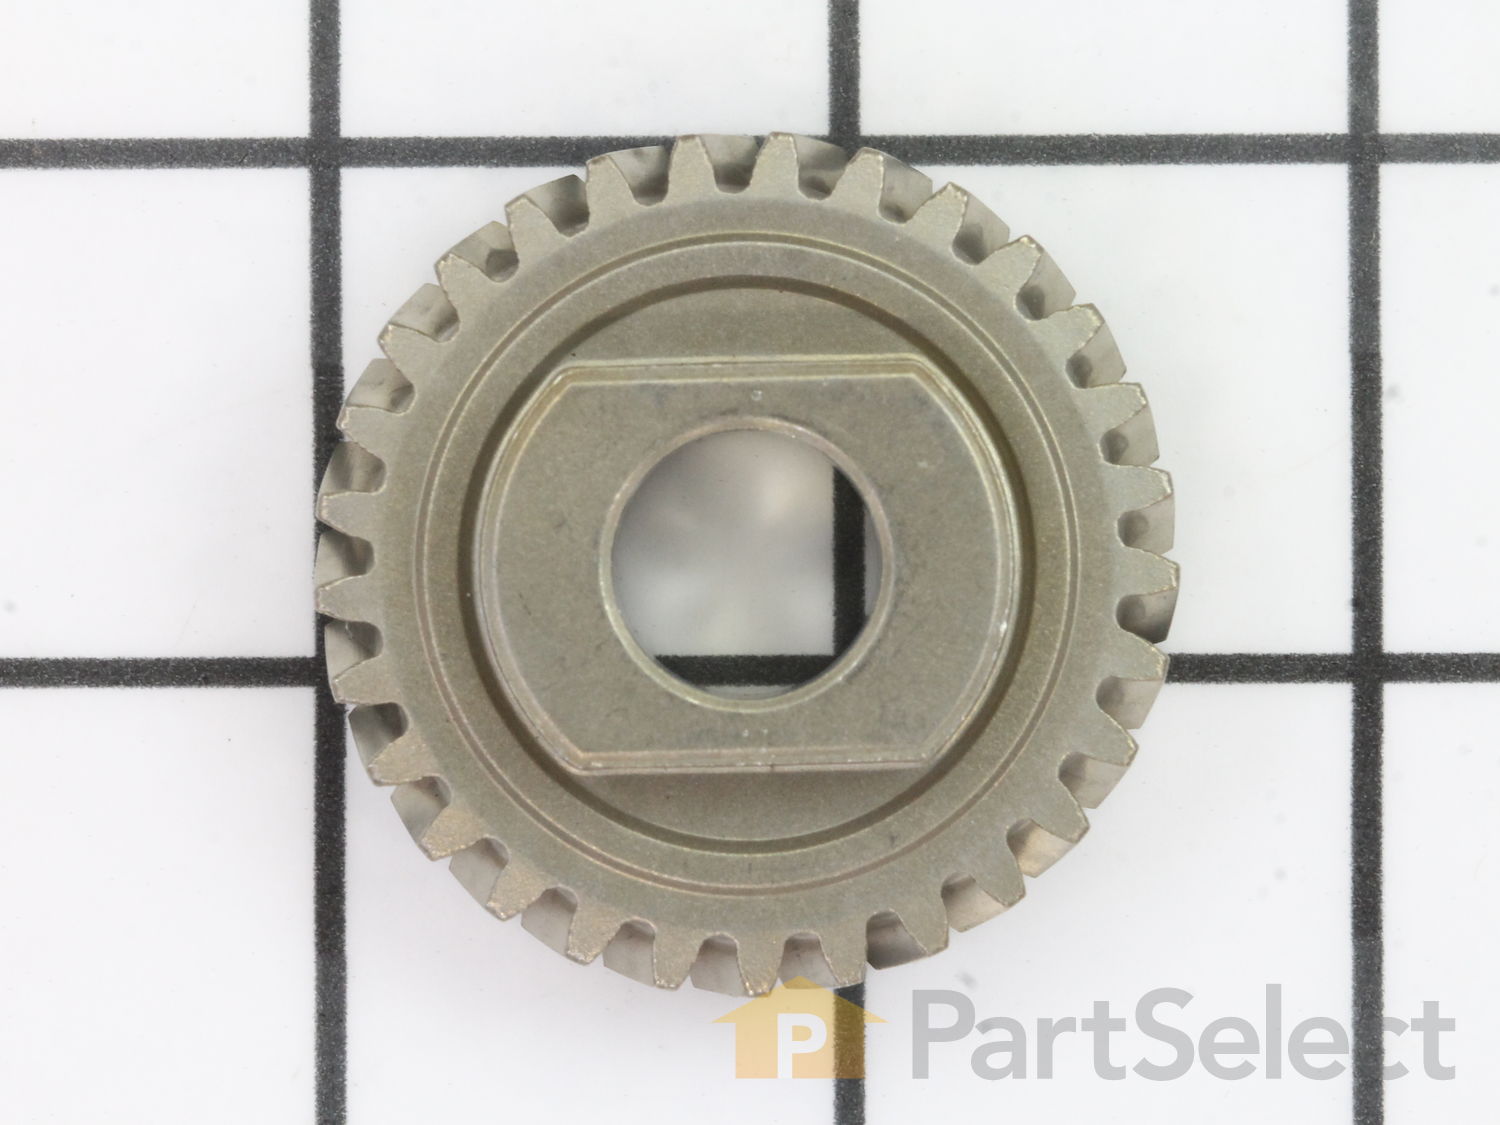 Replacement for KitchenAid Stand Mixer Worm Follower Gear